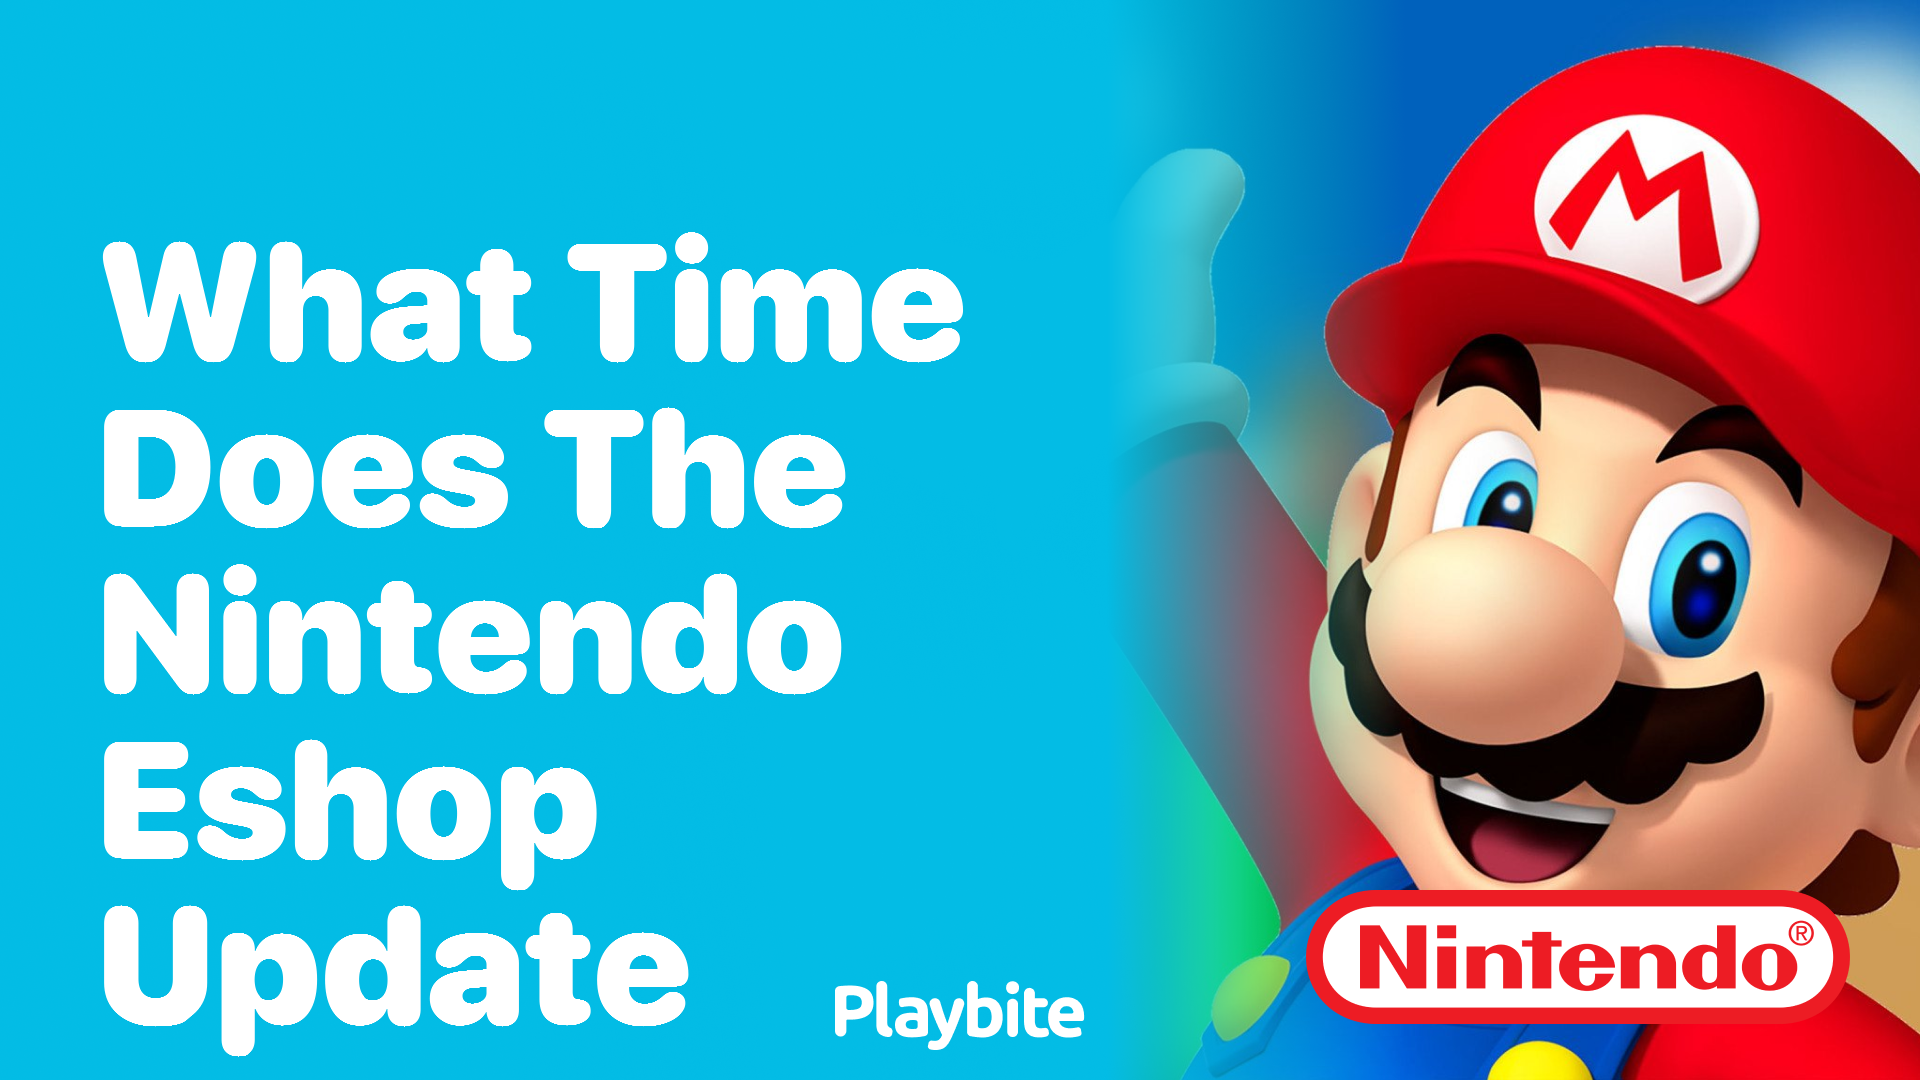 What Time Does the Nintendo eShop Update?